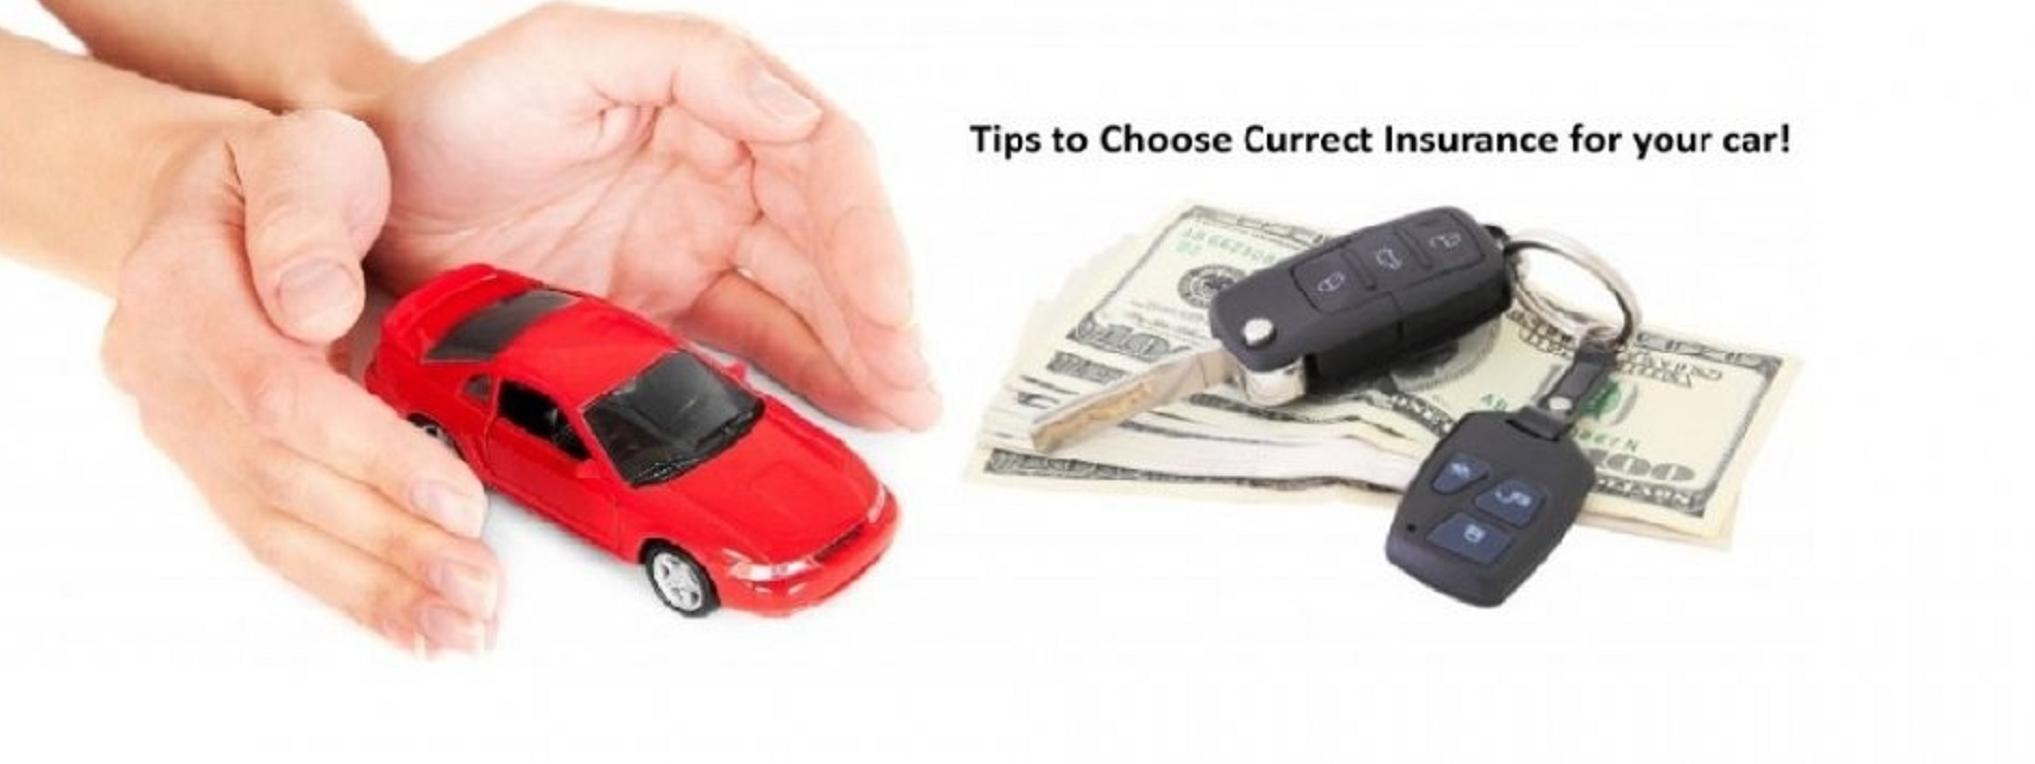 How to choose correct insurance for your vehicle